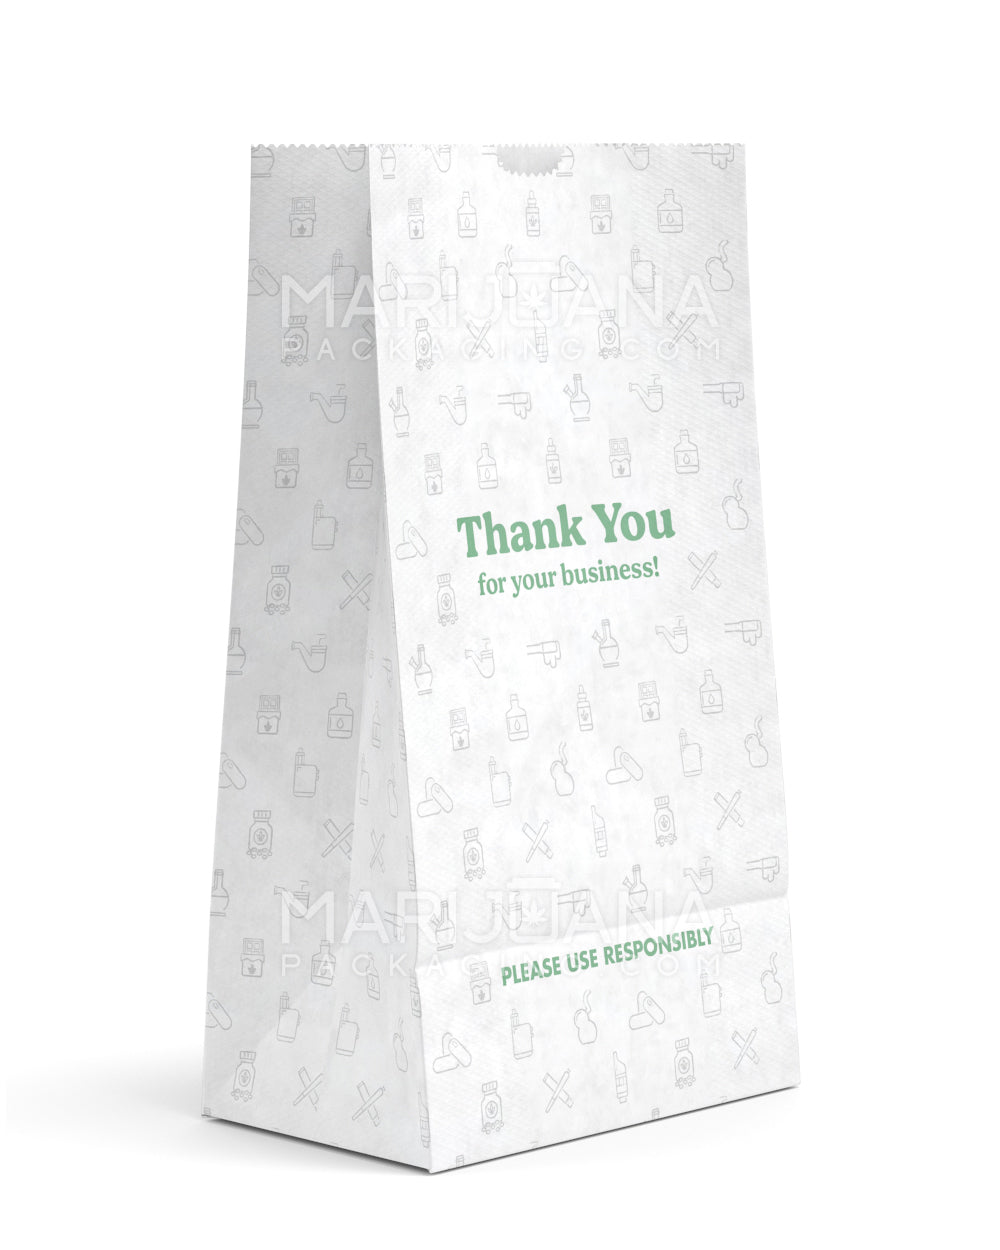 Thank You Bags | X Large - Kraft - 1000 Count - 1